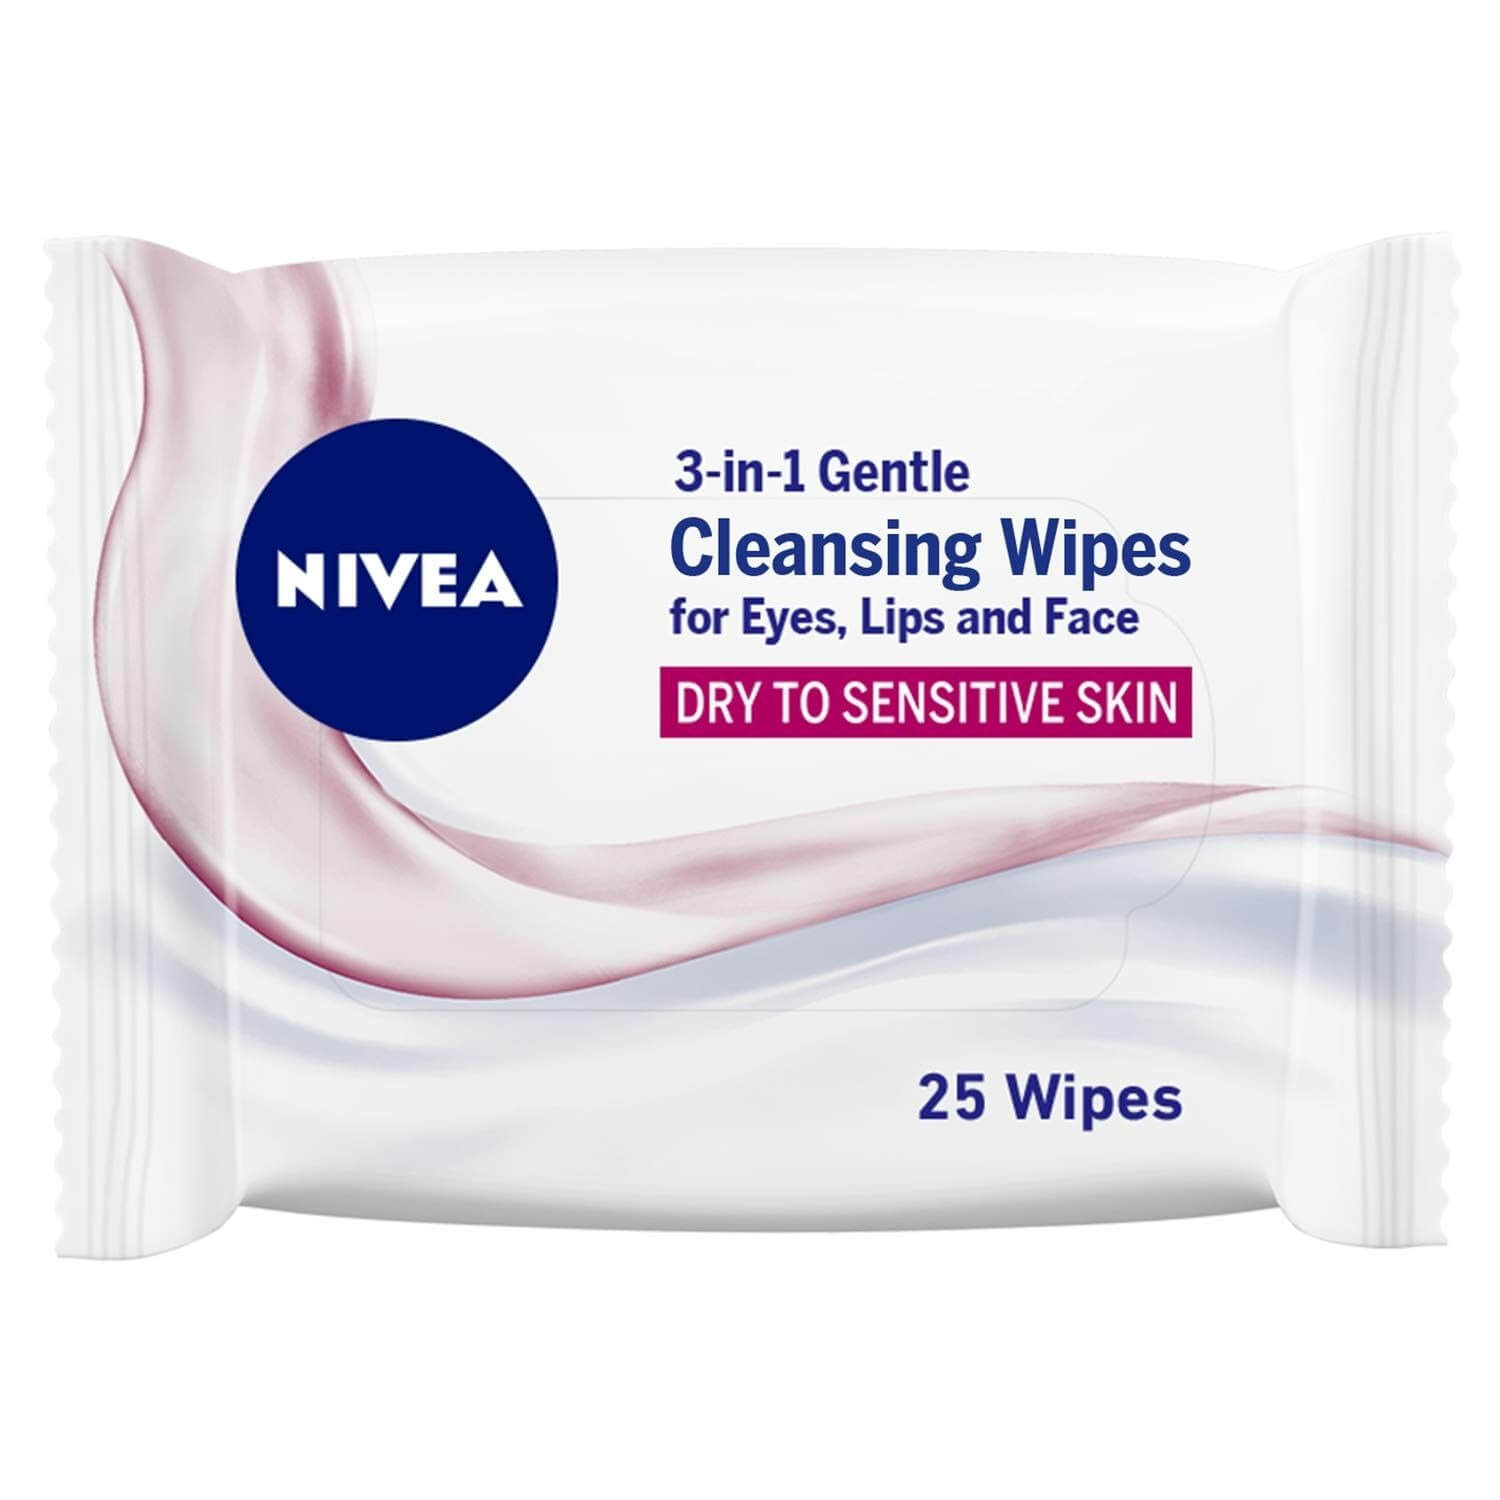 1591878025nivea-facial-cleansing-wipes-for-dry-and-sensitive-skin-25-pcs.jpg